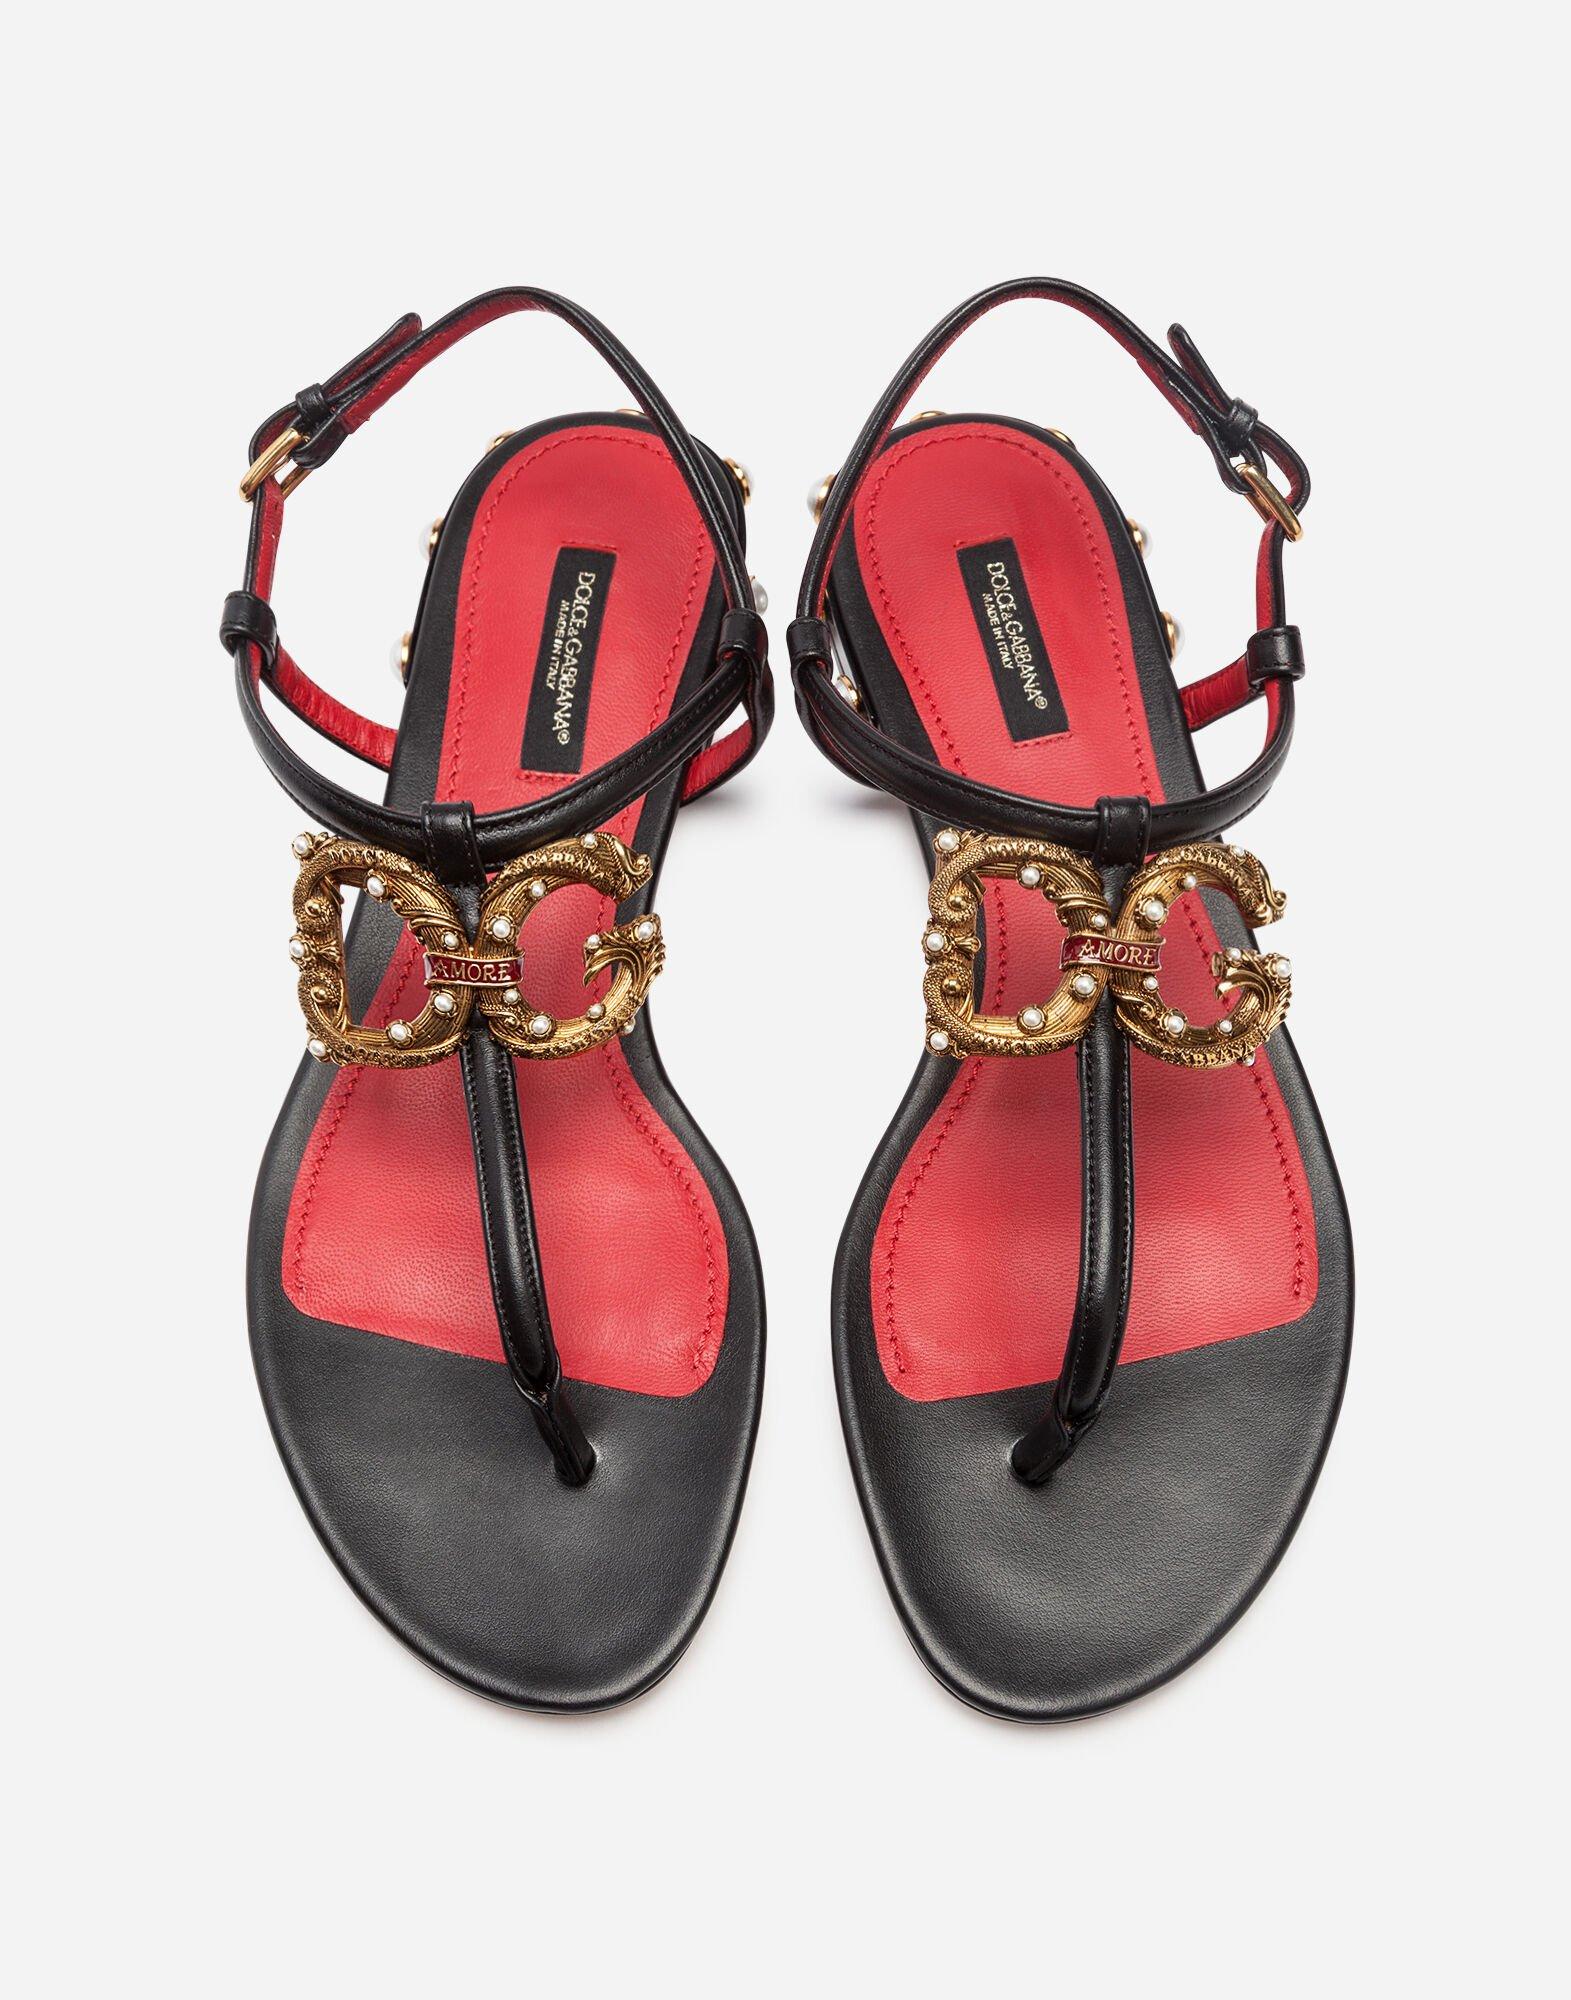 Dolce & Gabbana Leather Dg Amore Thong Sandals In Calfskin in 